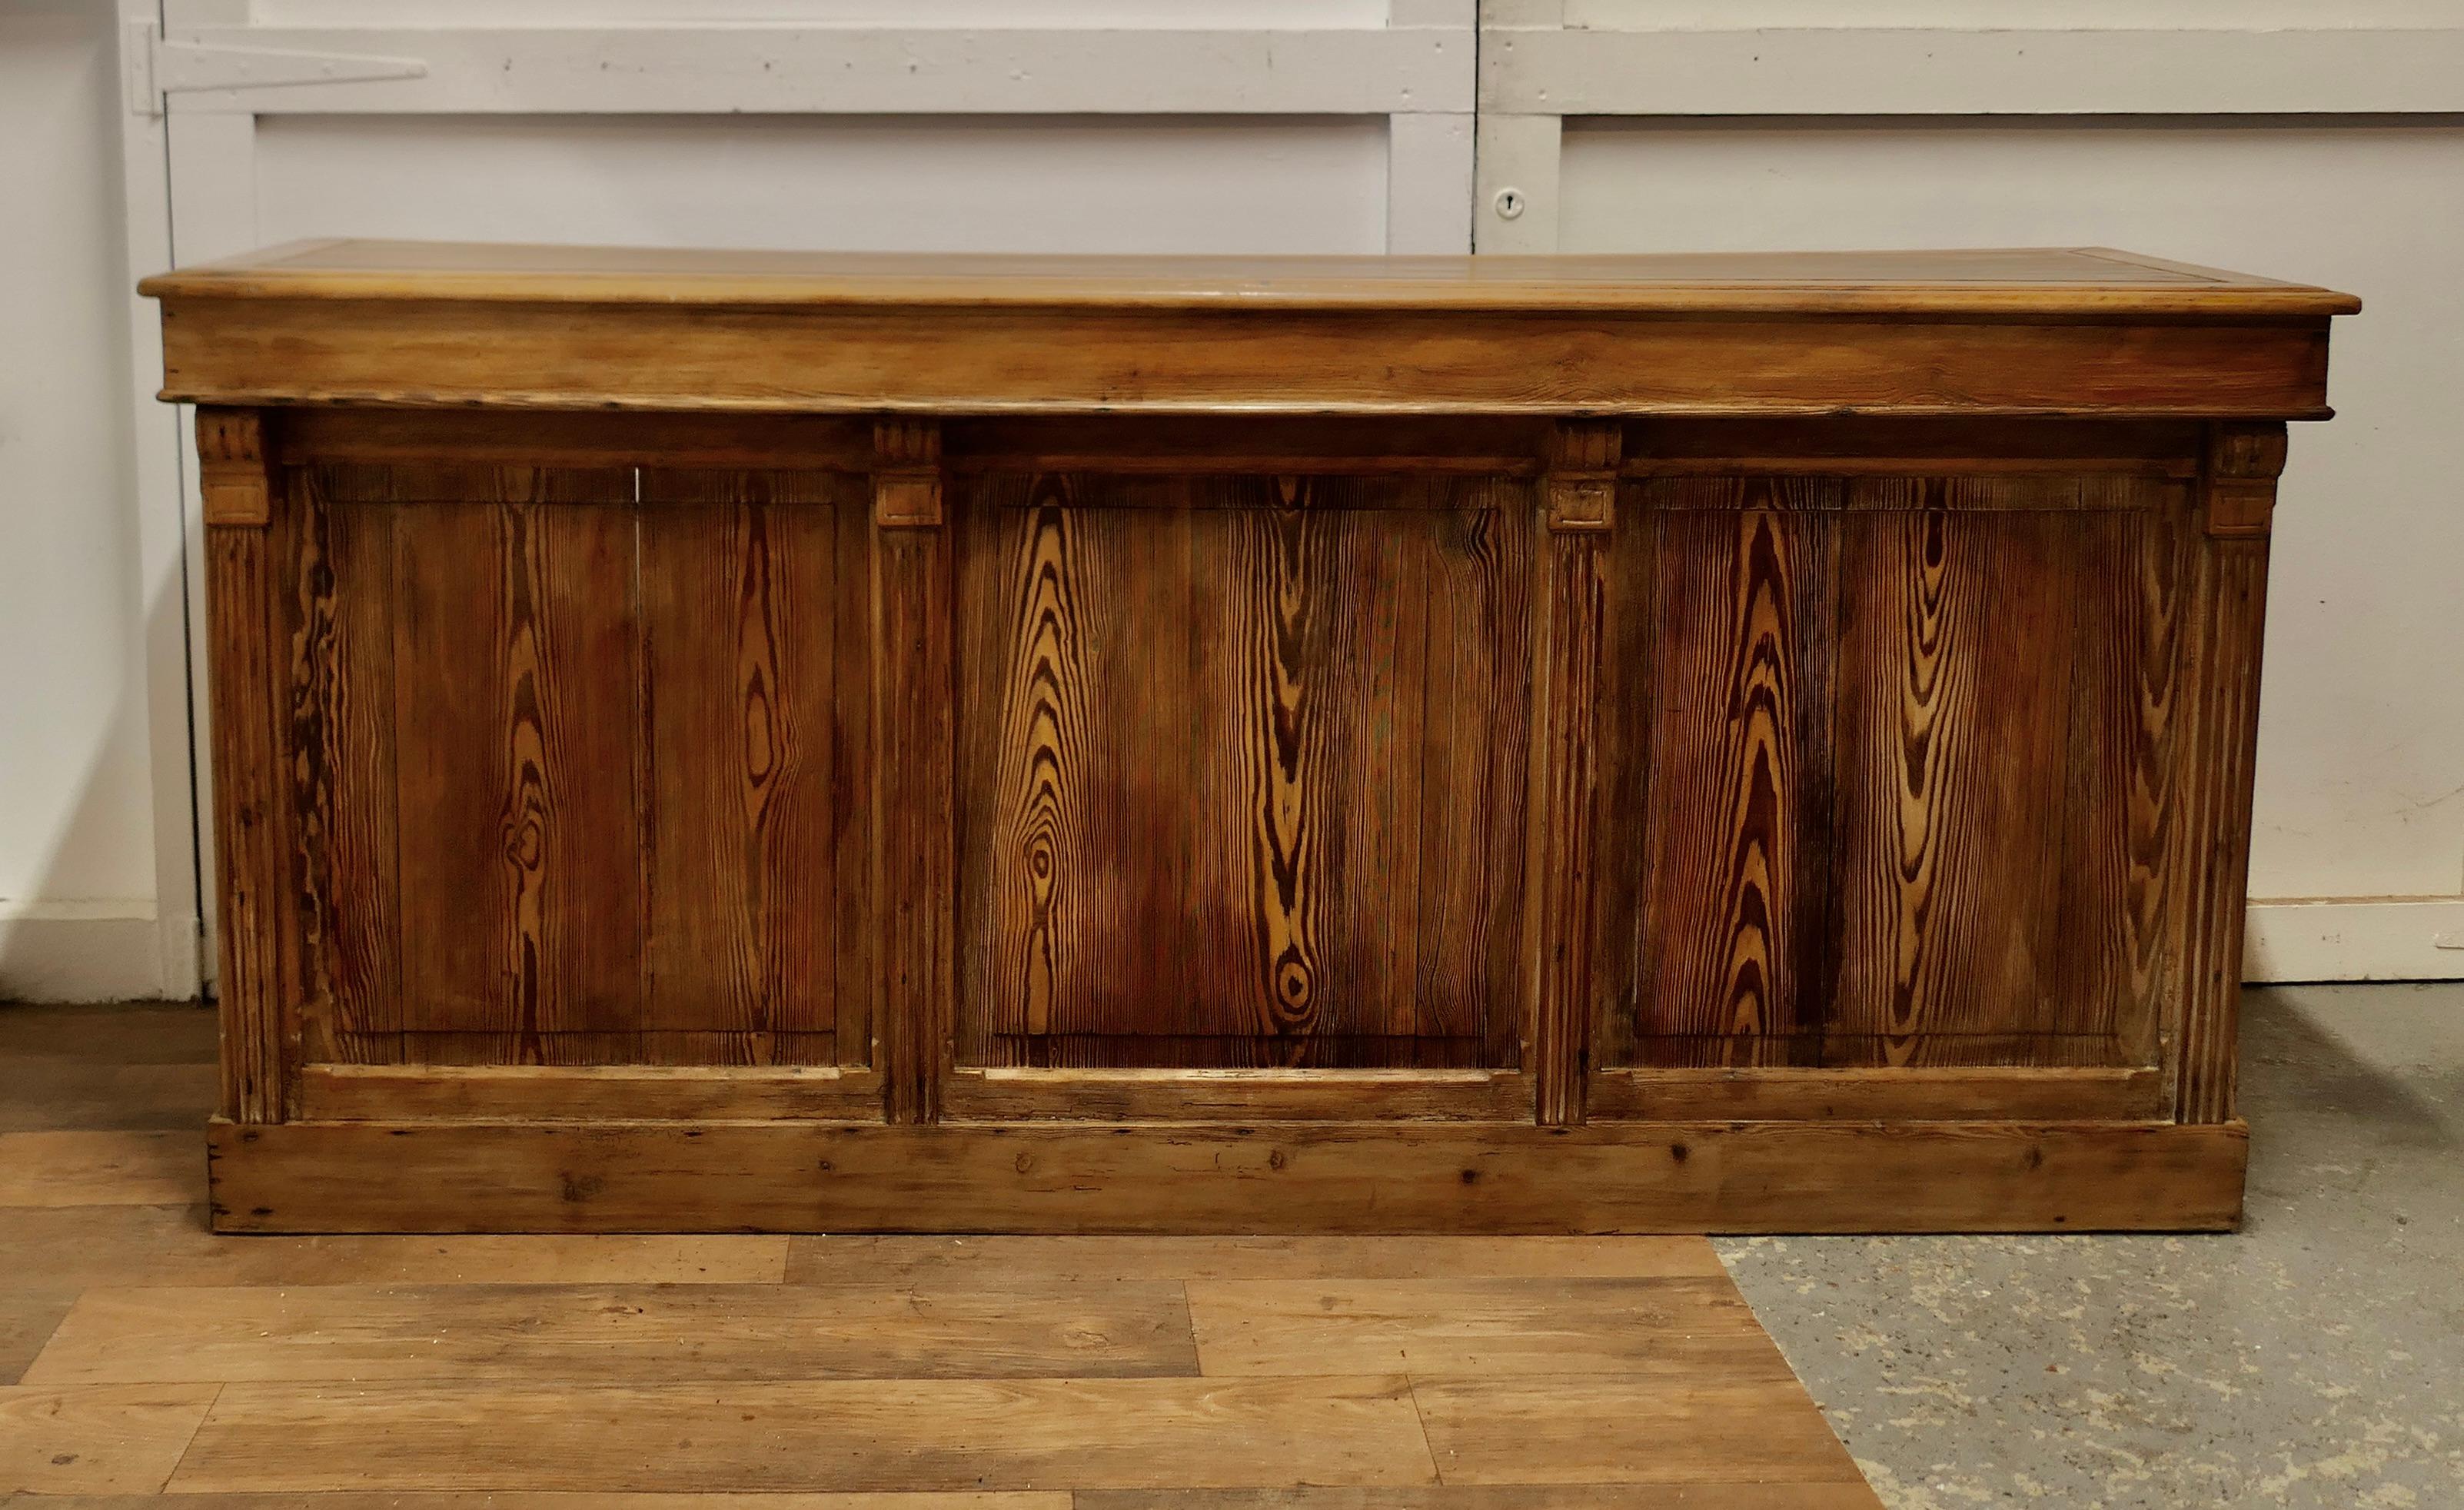 Large Rustic Pitch Pine Kitchen Island Counter, Dry Bar

This lovely old counter has a 1” thick solid pine panelled top, it has solid panelled front and sides and inside there is a deep storage shelf
This is a very heavy chunky piece, the dresser